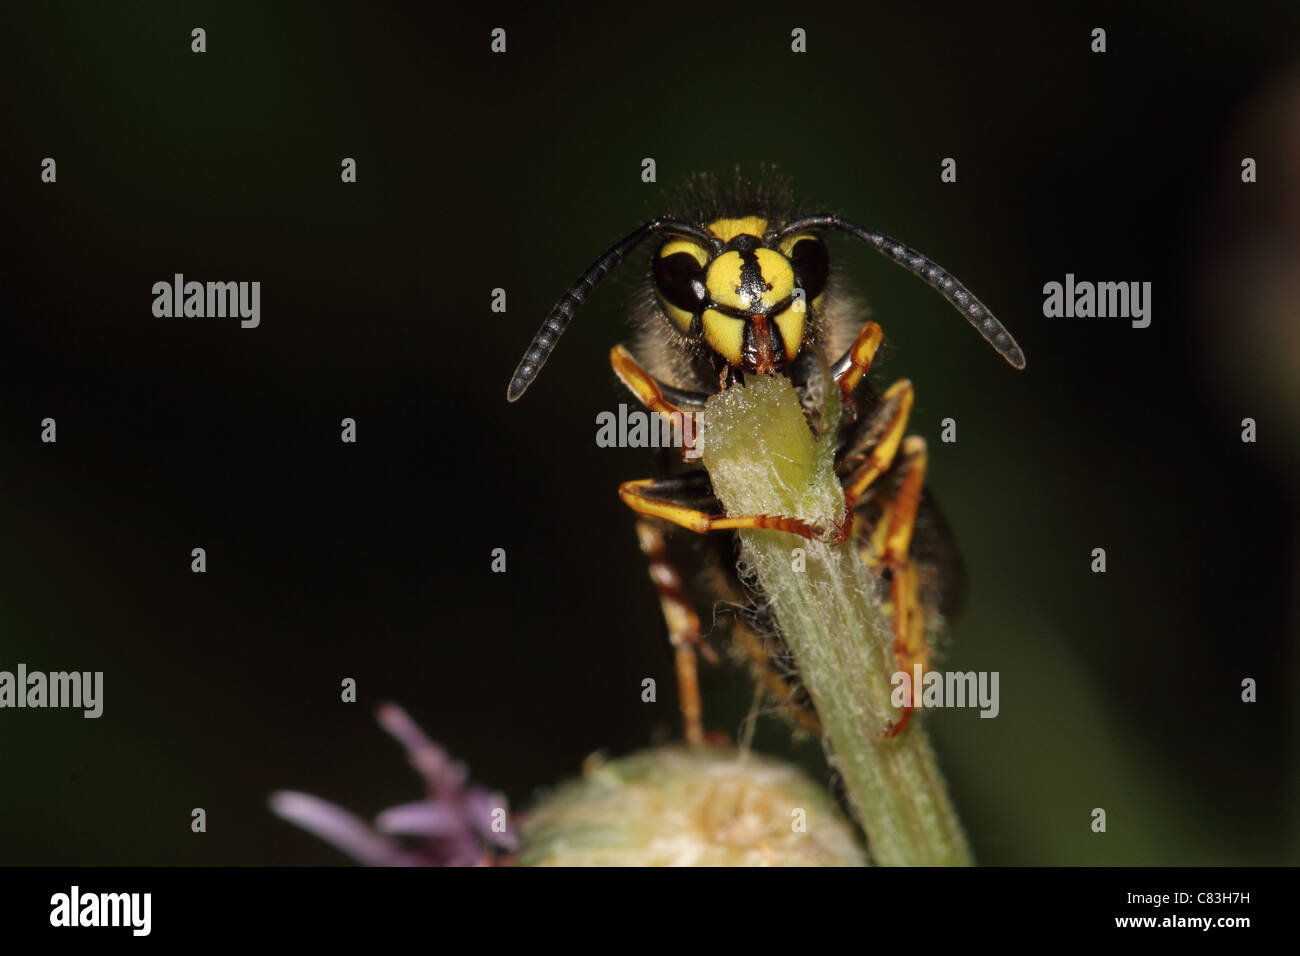 close up macro photo of a wasp landed on plant Stock Photo